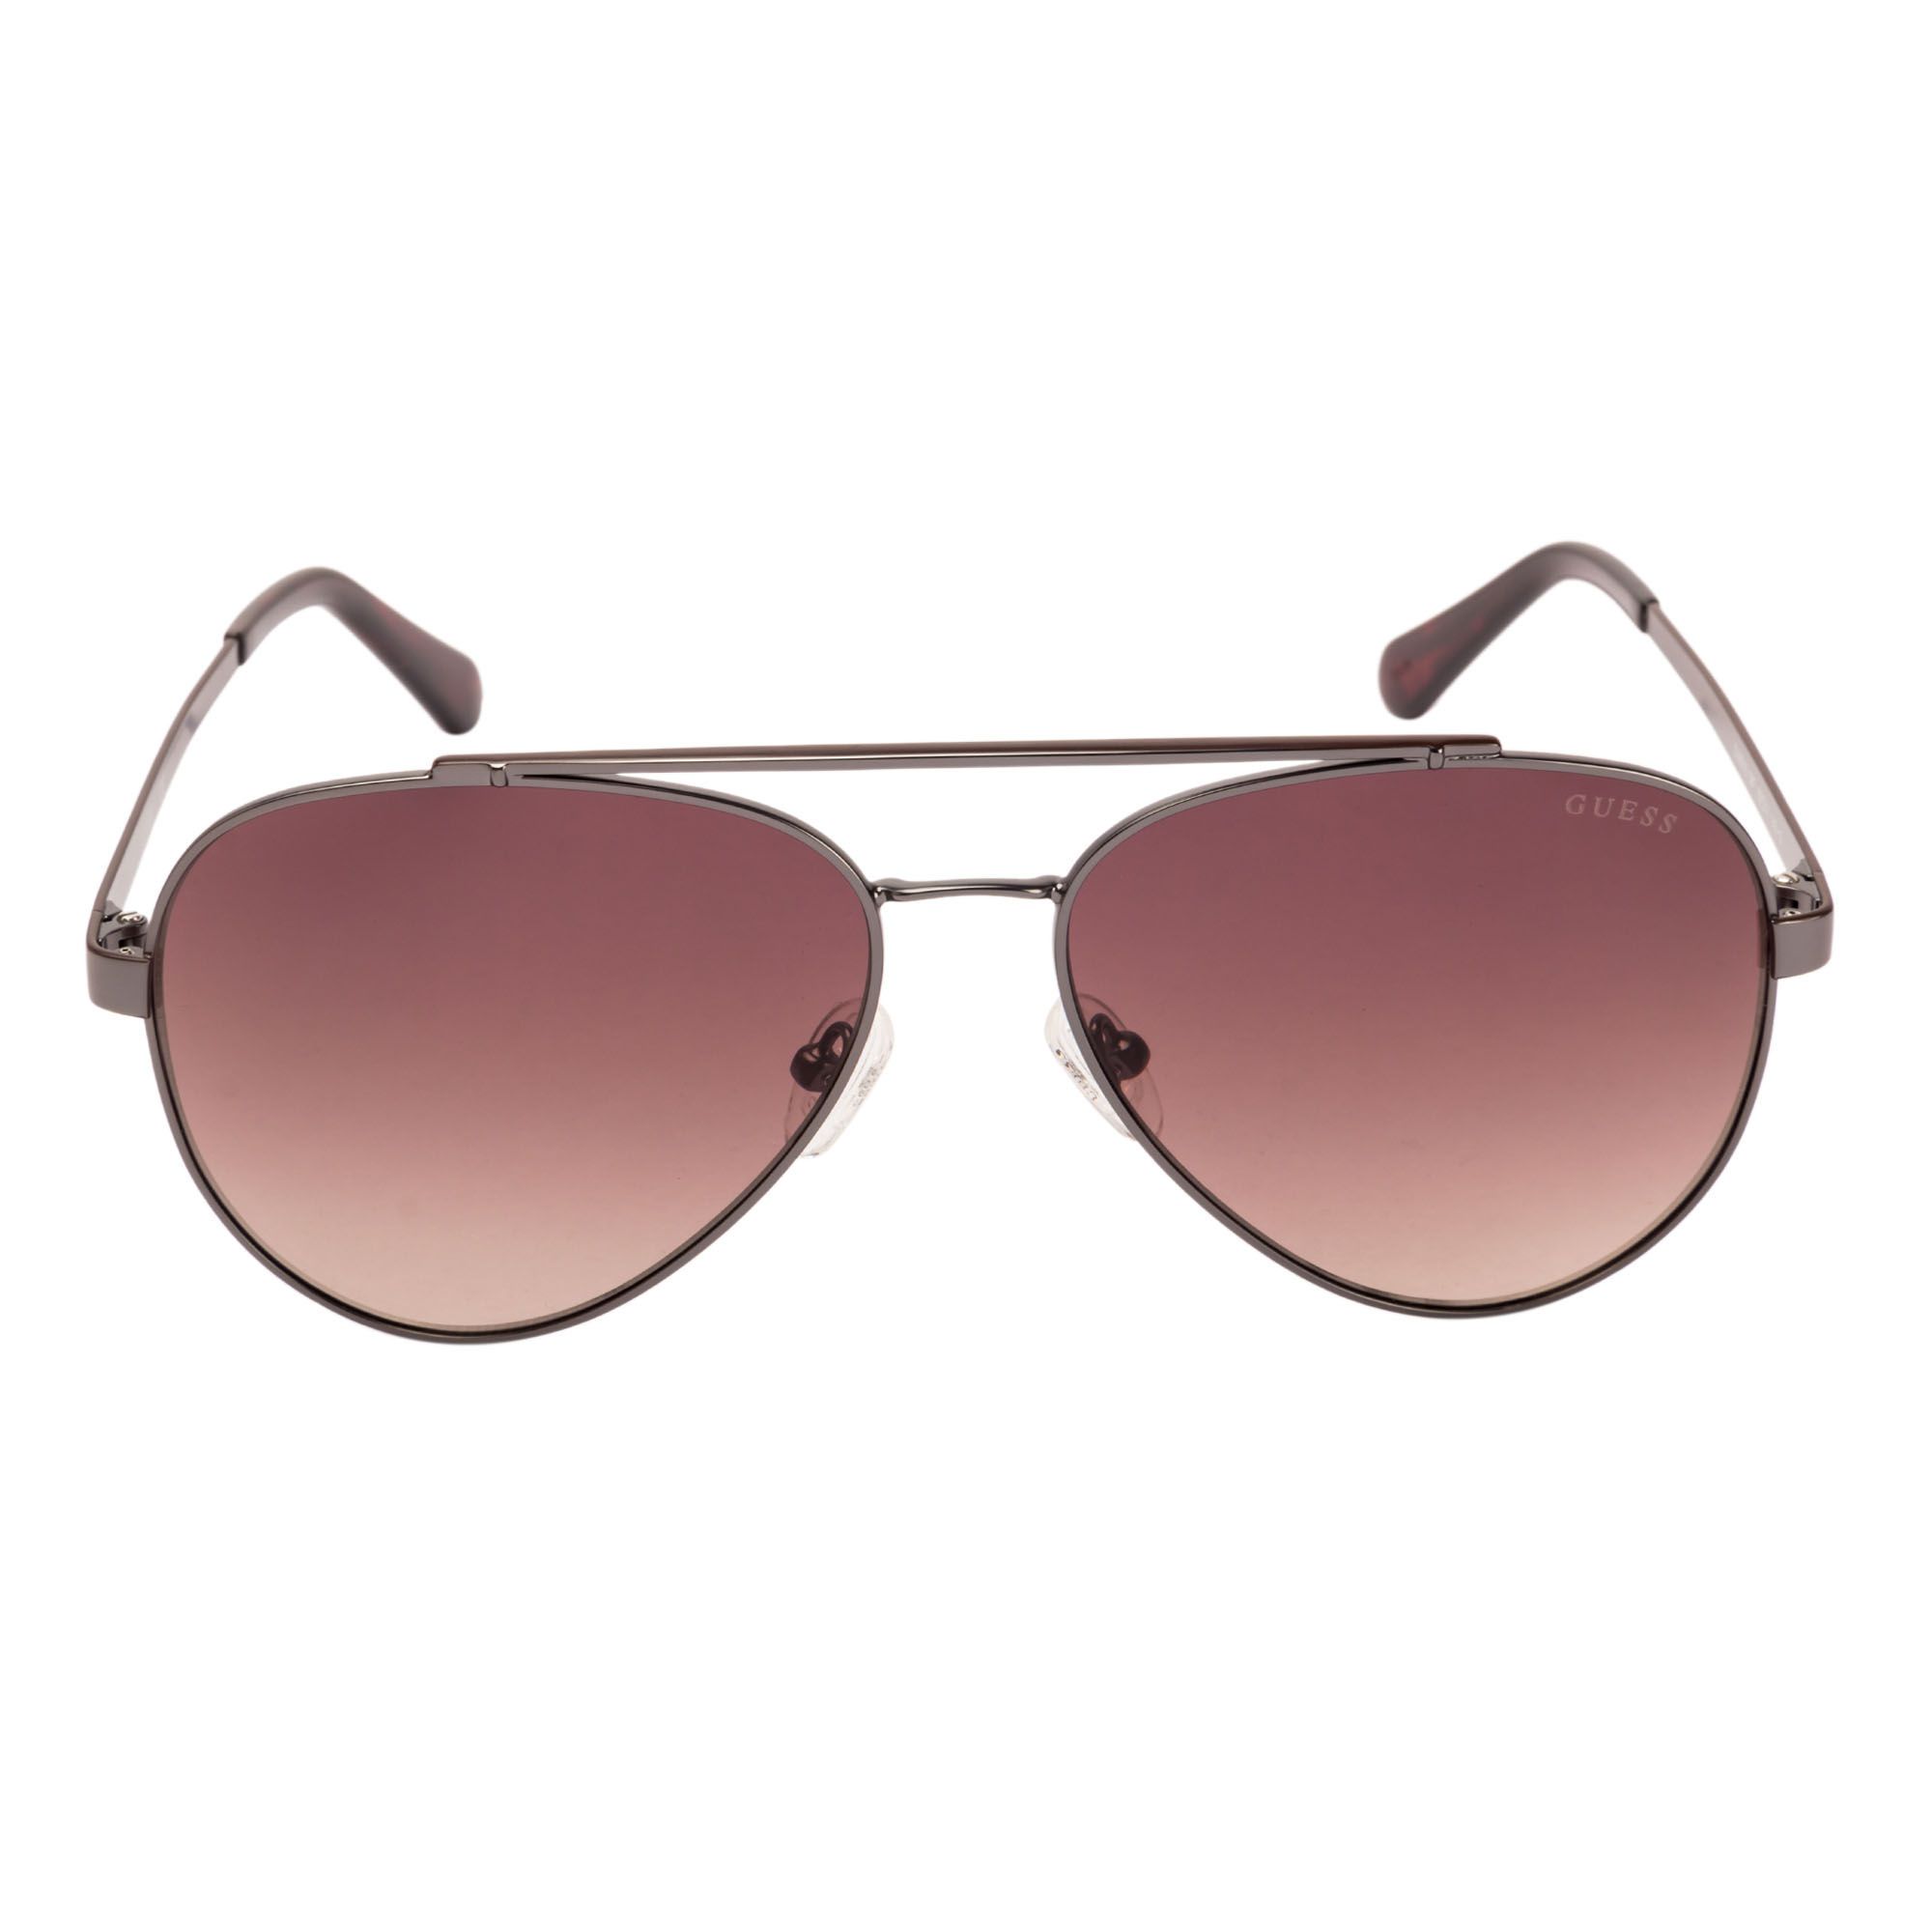 Guess Sunglasses Aviator With Brown Lens For Men